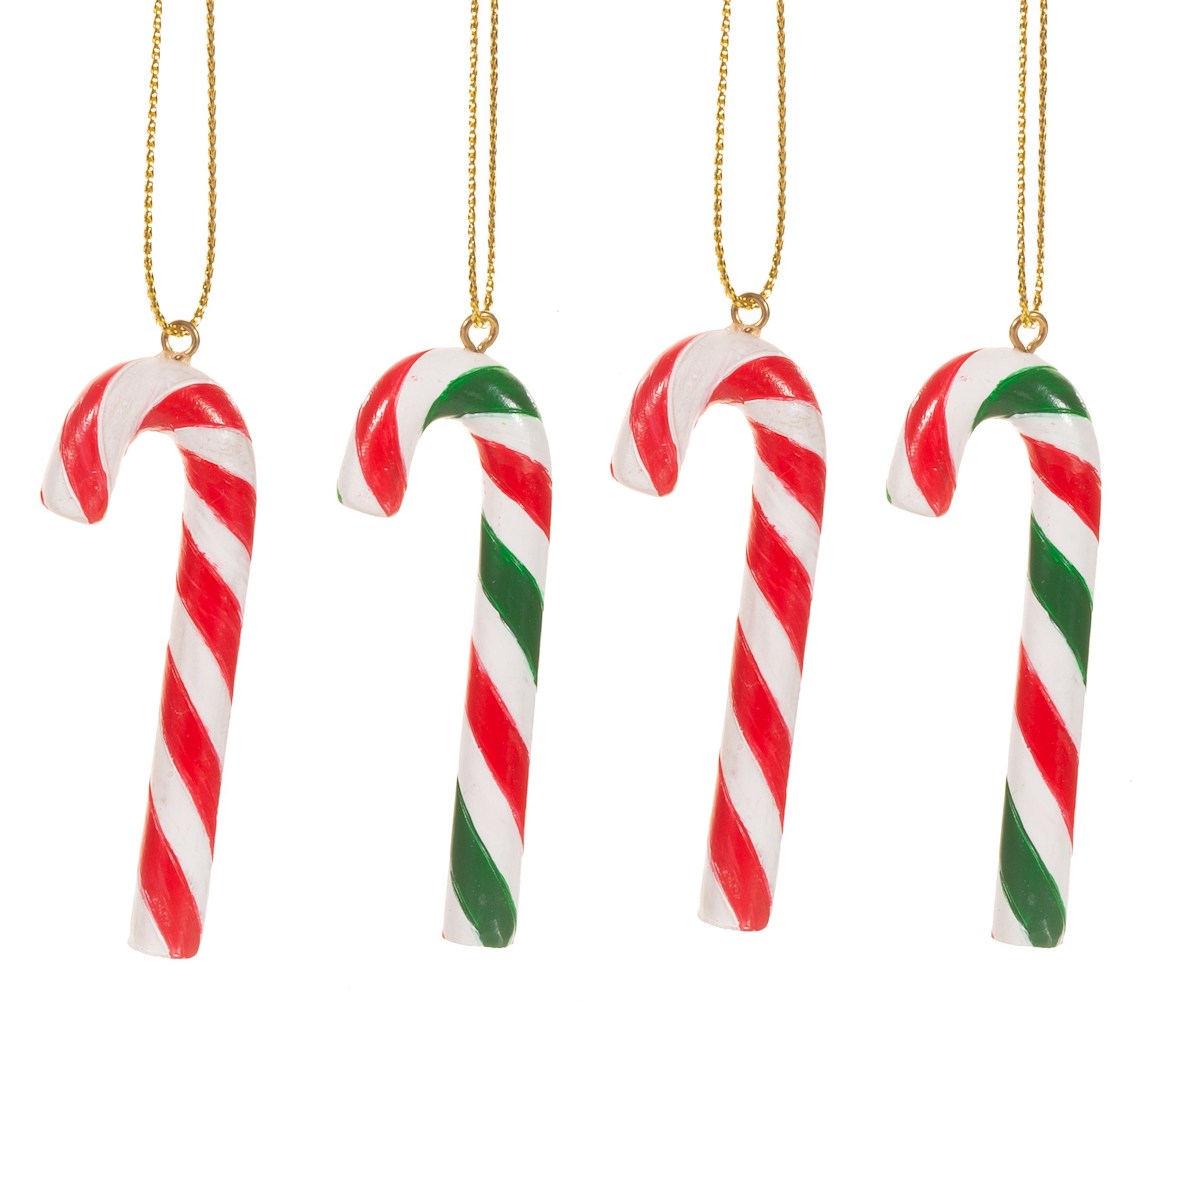 Sass & Belle Set of 4 Multicoloured Candy Cane Christmas Tree Decorations